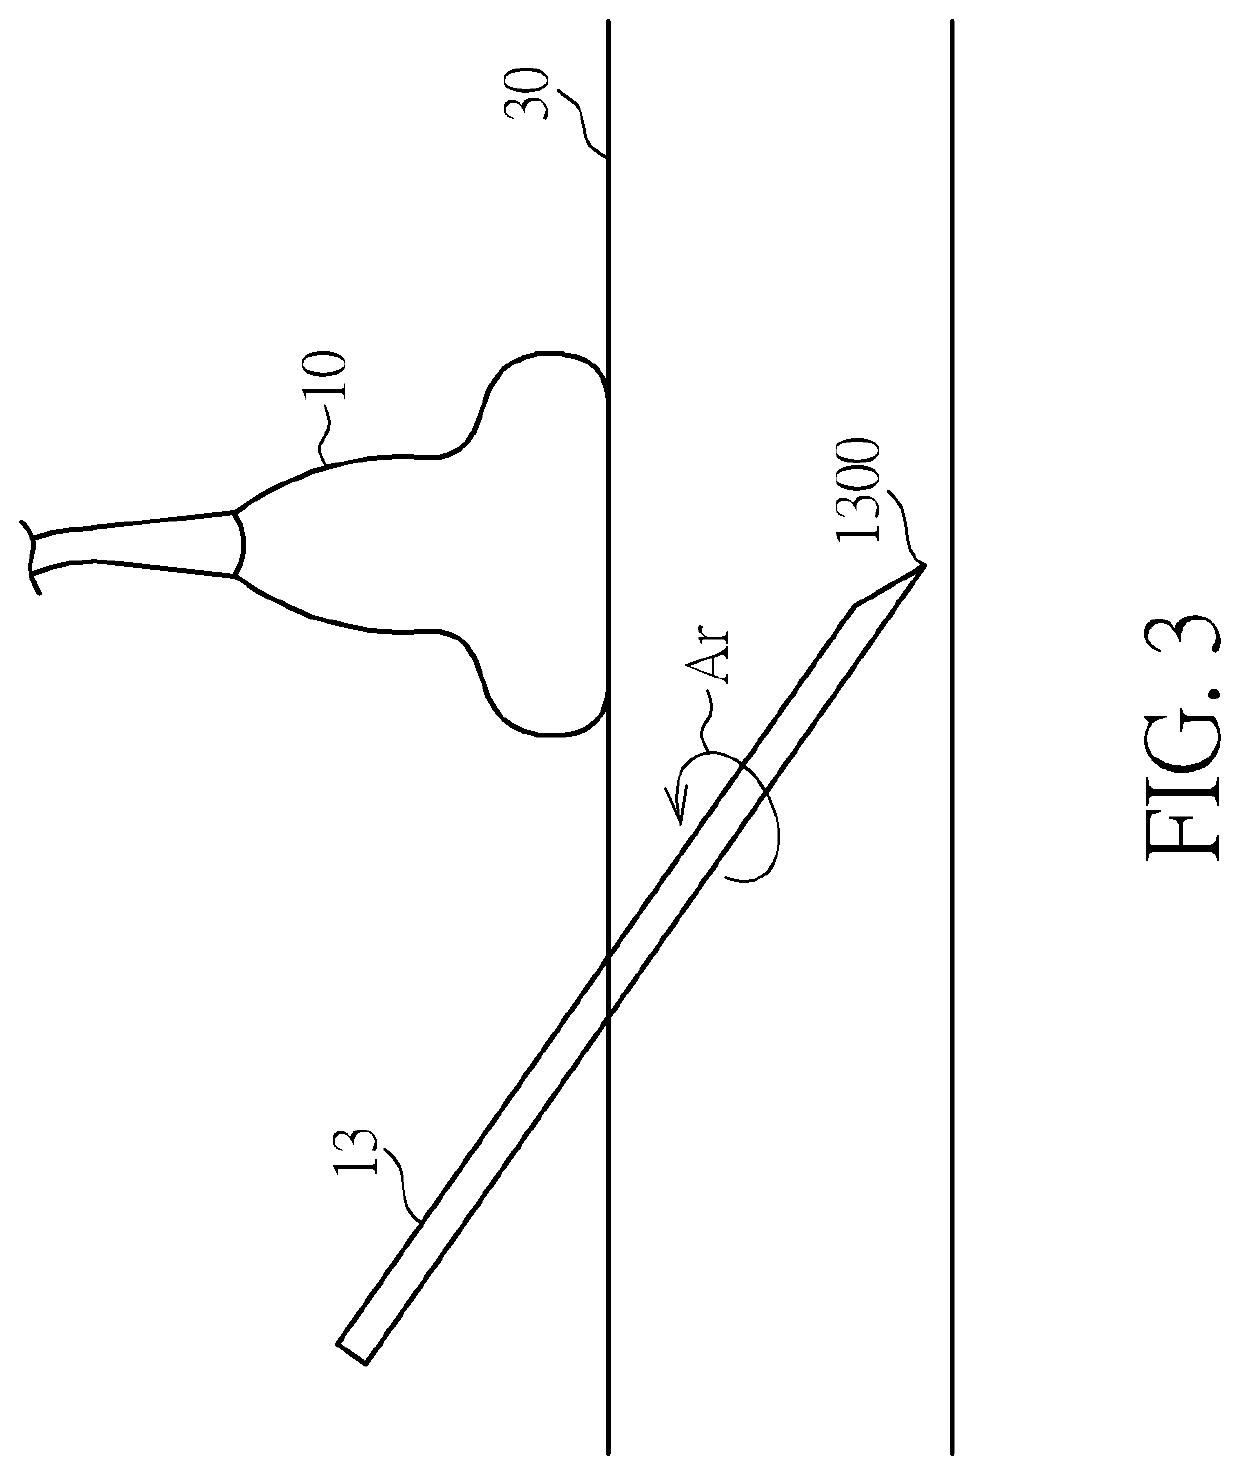 Ultrasound needle positioning system and ultrasound needle positioning method utilizing convolutional neural networks